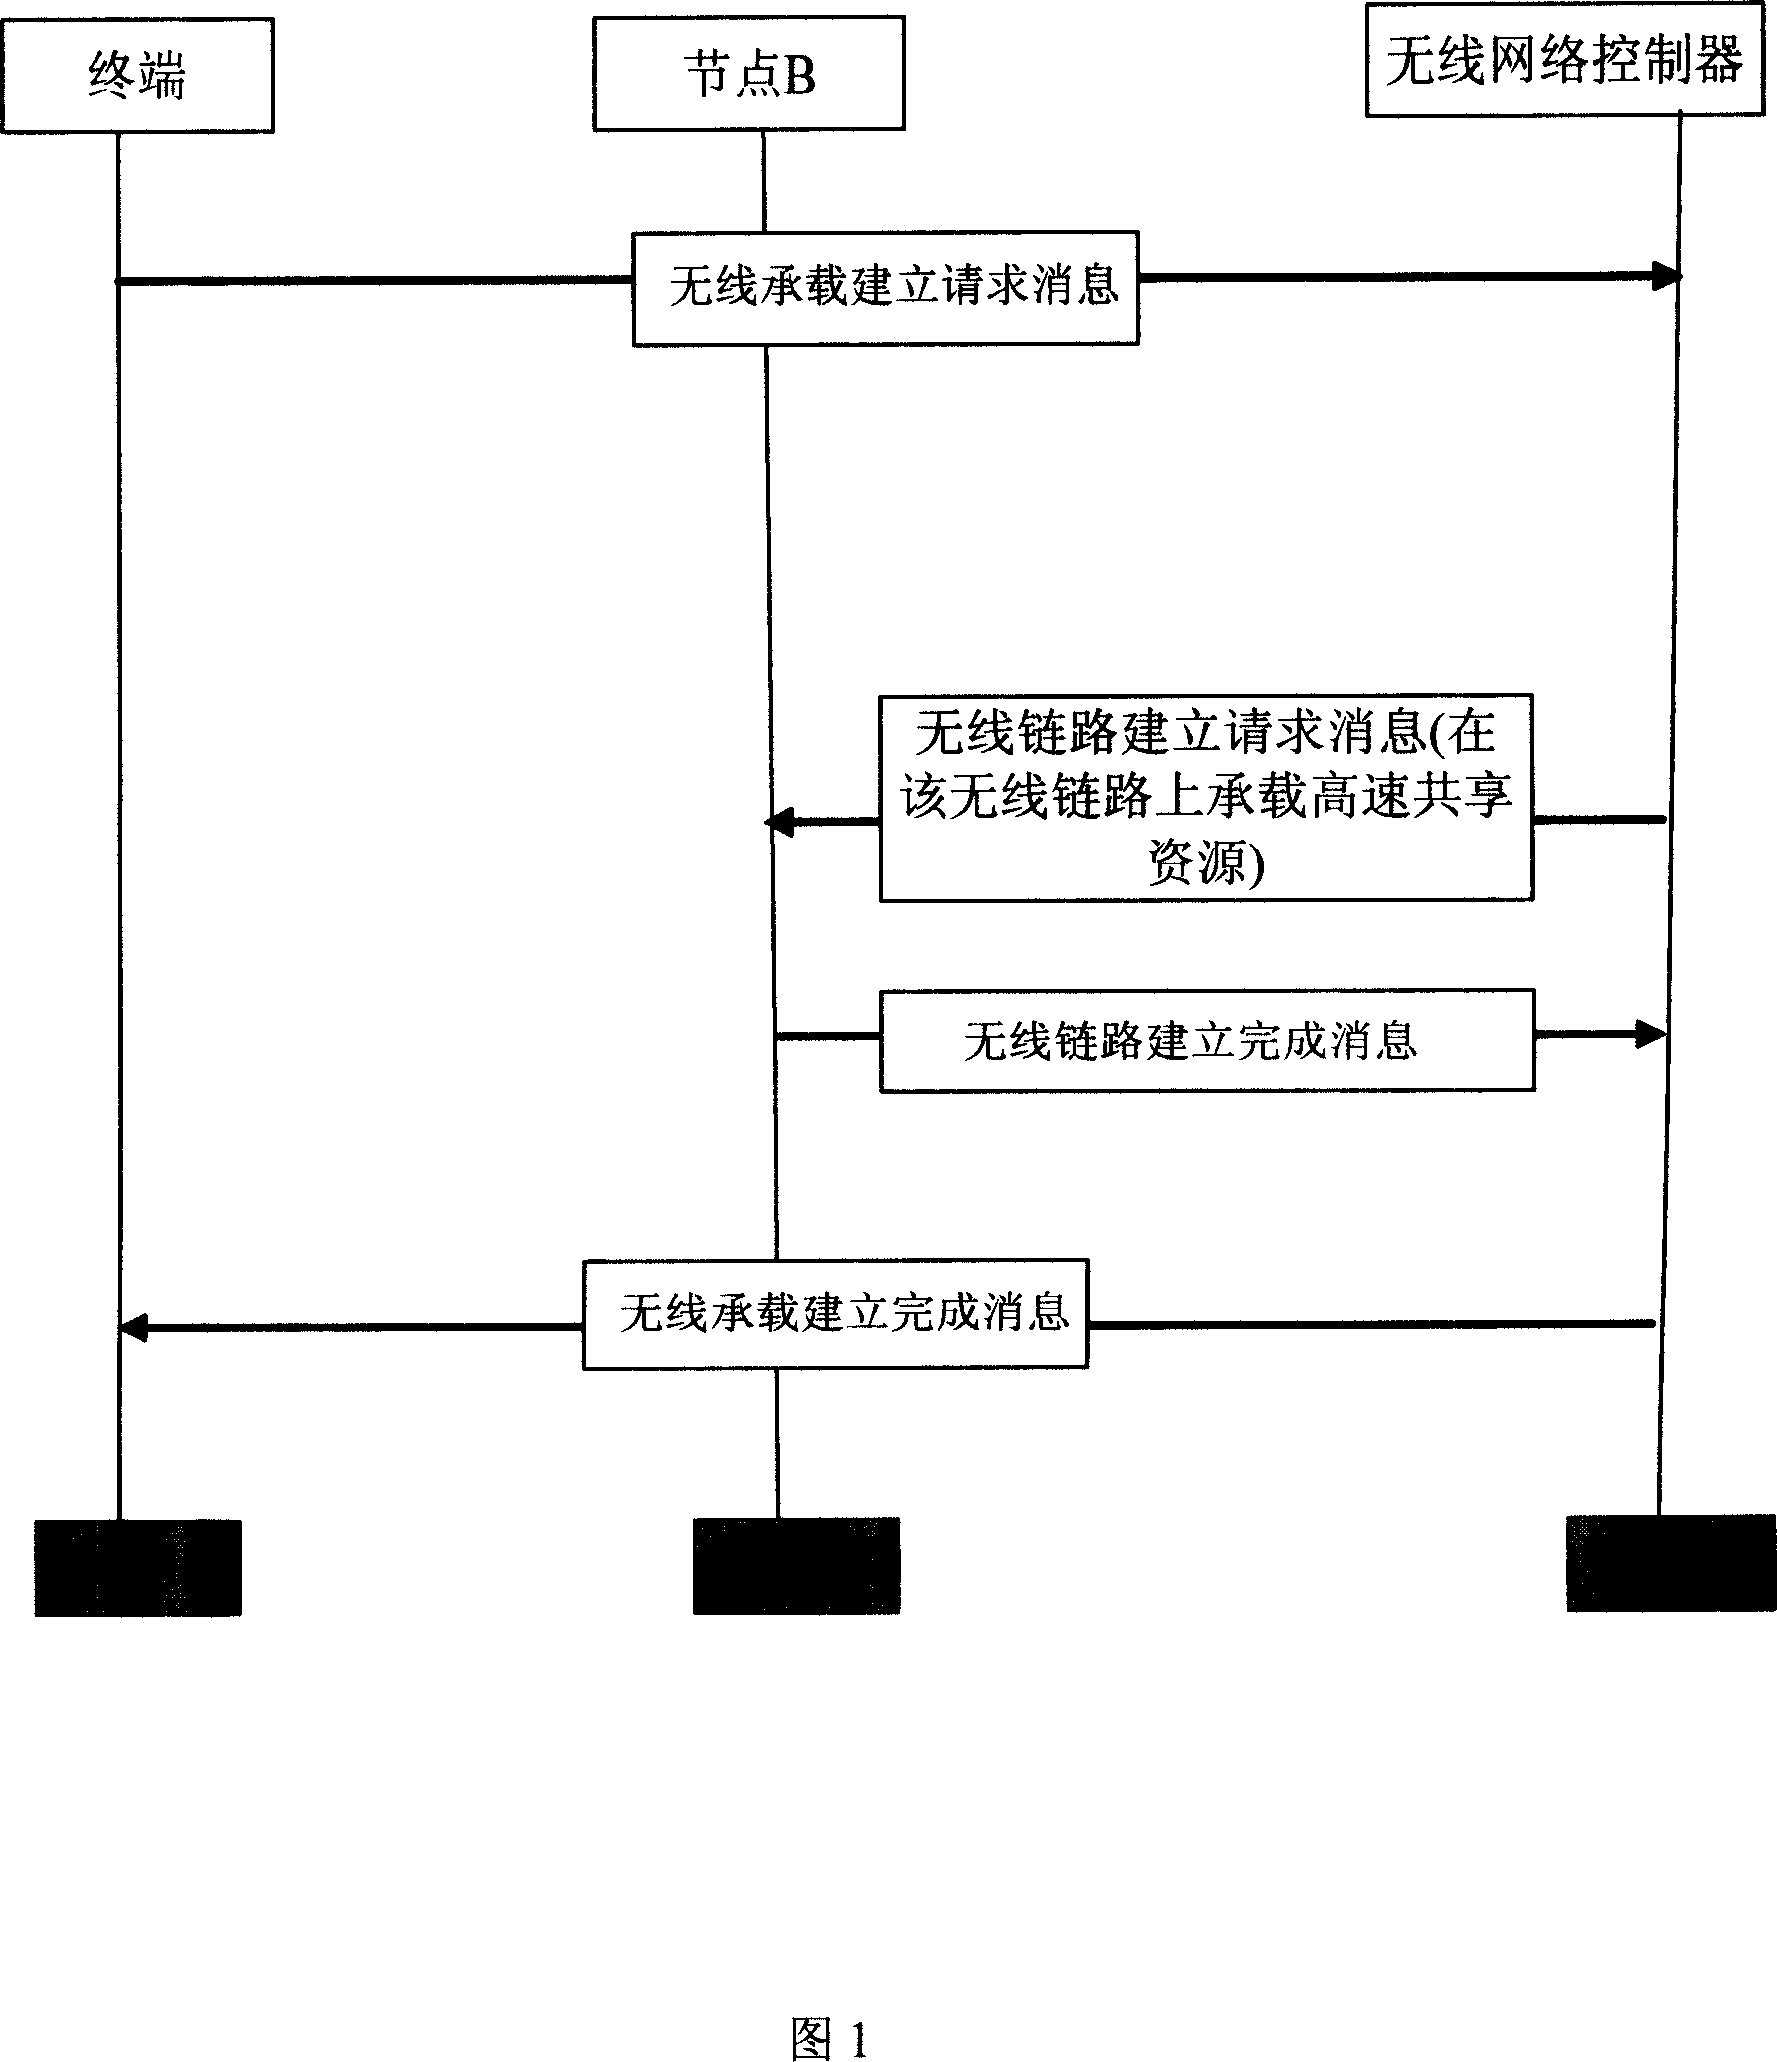 Method of implementing high speed downlink sharing channel co-frequency cell handoff